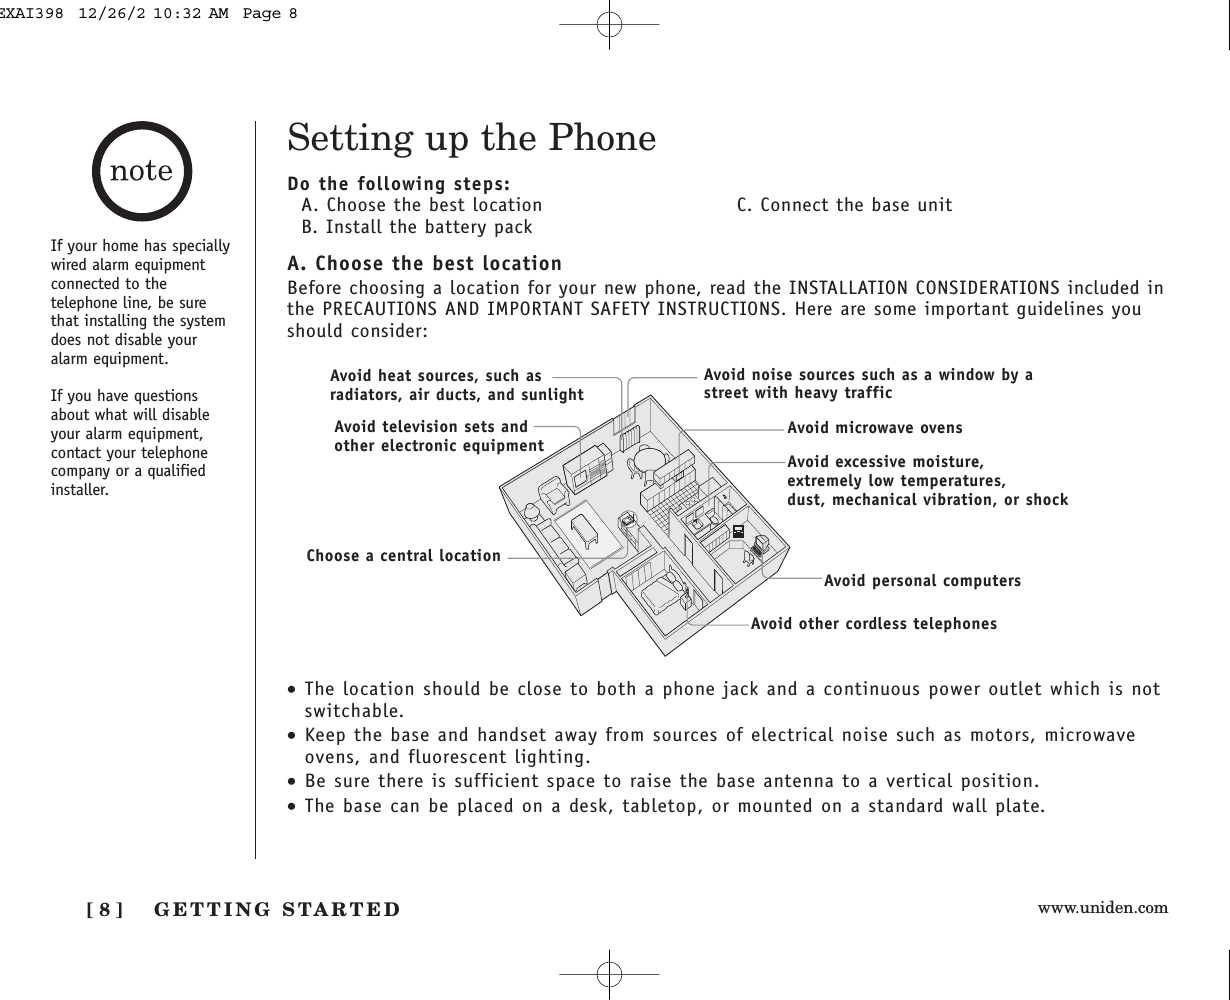 www.uniden.comGETTING STARTED[ 8 ]Setting up the PhoneDo the following steps:A. Choose the best location C. Connect the base unitB. Install the battery packA. Choose the best locationBefore choosing a location for your new phone, read the INSTALLATION CONSIDERATIONS included inthe PRECAUTIONS AND IMPORTANT SAFETY INSTRUCTIONS. Here are some important guidelines youshould consider:•The location should be close to both a phone jack and a continuous power outlet which is notswitchable.•Keep the base and handset away from sources of electrical noise such as motors, microwaveovens, and fluorescent lighting.•Be sure there is sufficient space to raise the base antenna to a vertical position.•The base can be placed on a desk, tabletop, or mounted on a standard wall plate.Avoid excessive moisture, extremely low temperatures, dust, mechanical vibration, or shockAvoid heat sources, such asradiators, air ducts, and sunlightAvoid television sets andother electronic equipmentAvoid noise sources such as a window by astreet with heavy trafficAvoid microwave ovensAvoid personal computersAvoid other cordless telephonesChoose a central locationIf your home has speciallywired alarm equipmentconnected to thetelephone line, be surethat installing the systemdoes not disable youralarm equipment.If you have questionsabout what will disableyour alarm equipment,contact your telephonecompany or a qualifiedinstaller.EXAI398  12/26/2 10:32 AM  Page 8